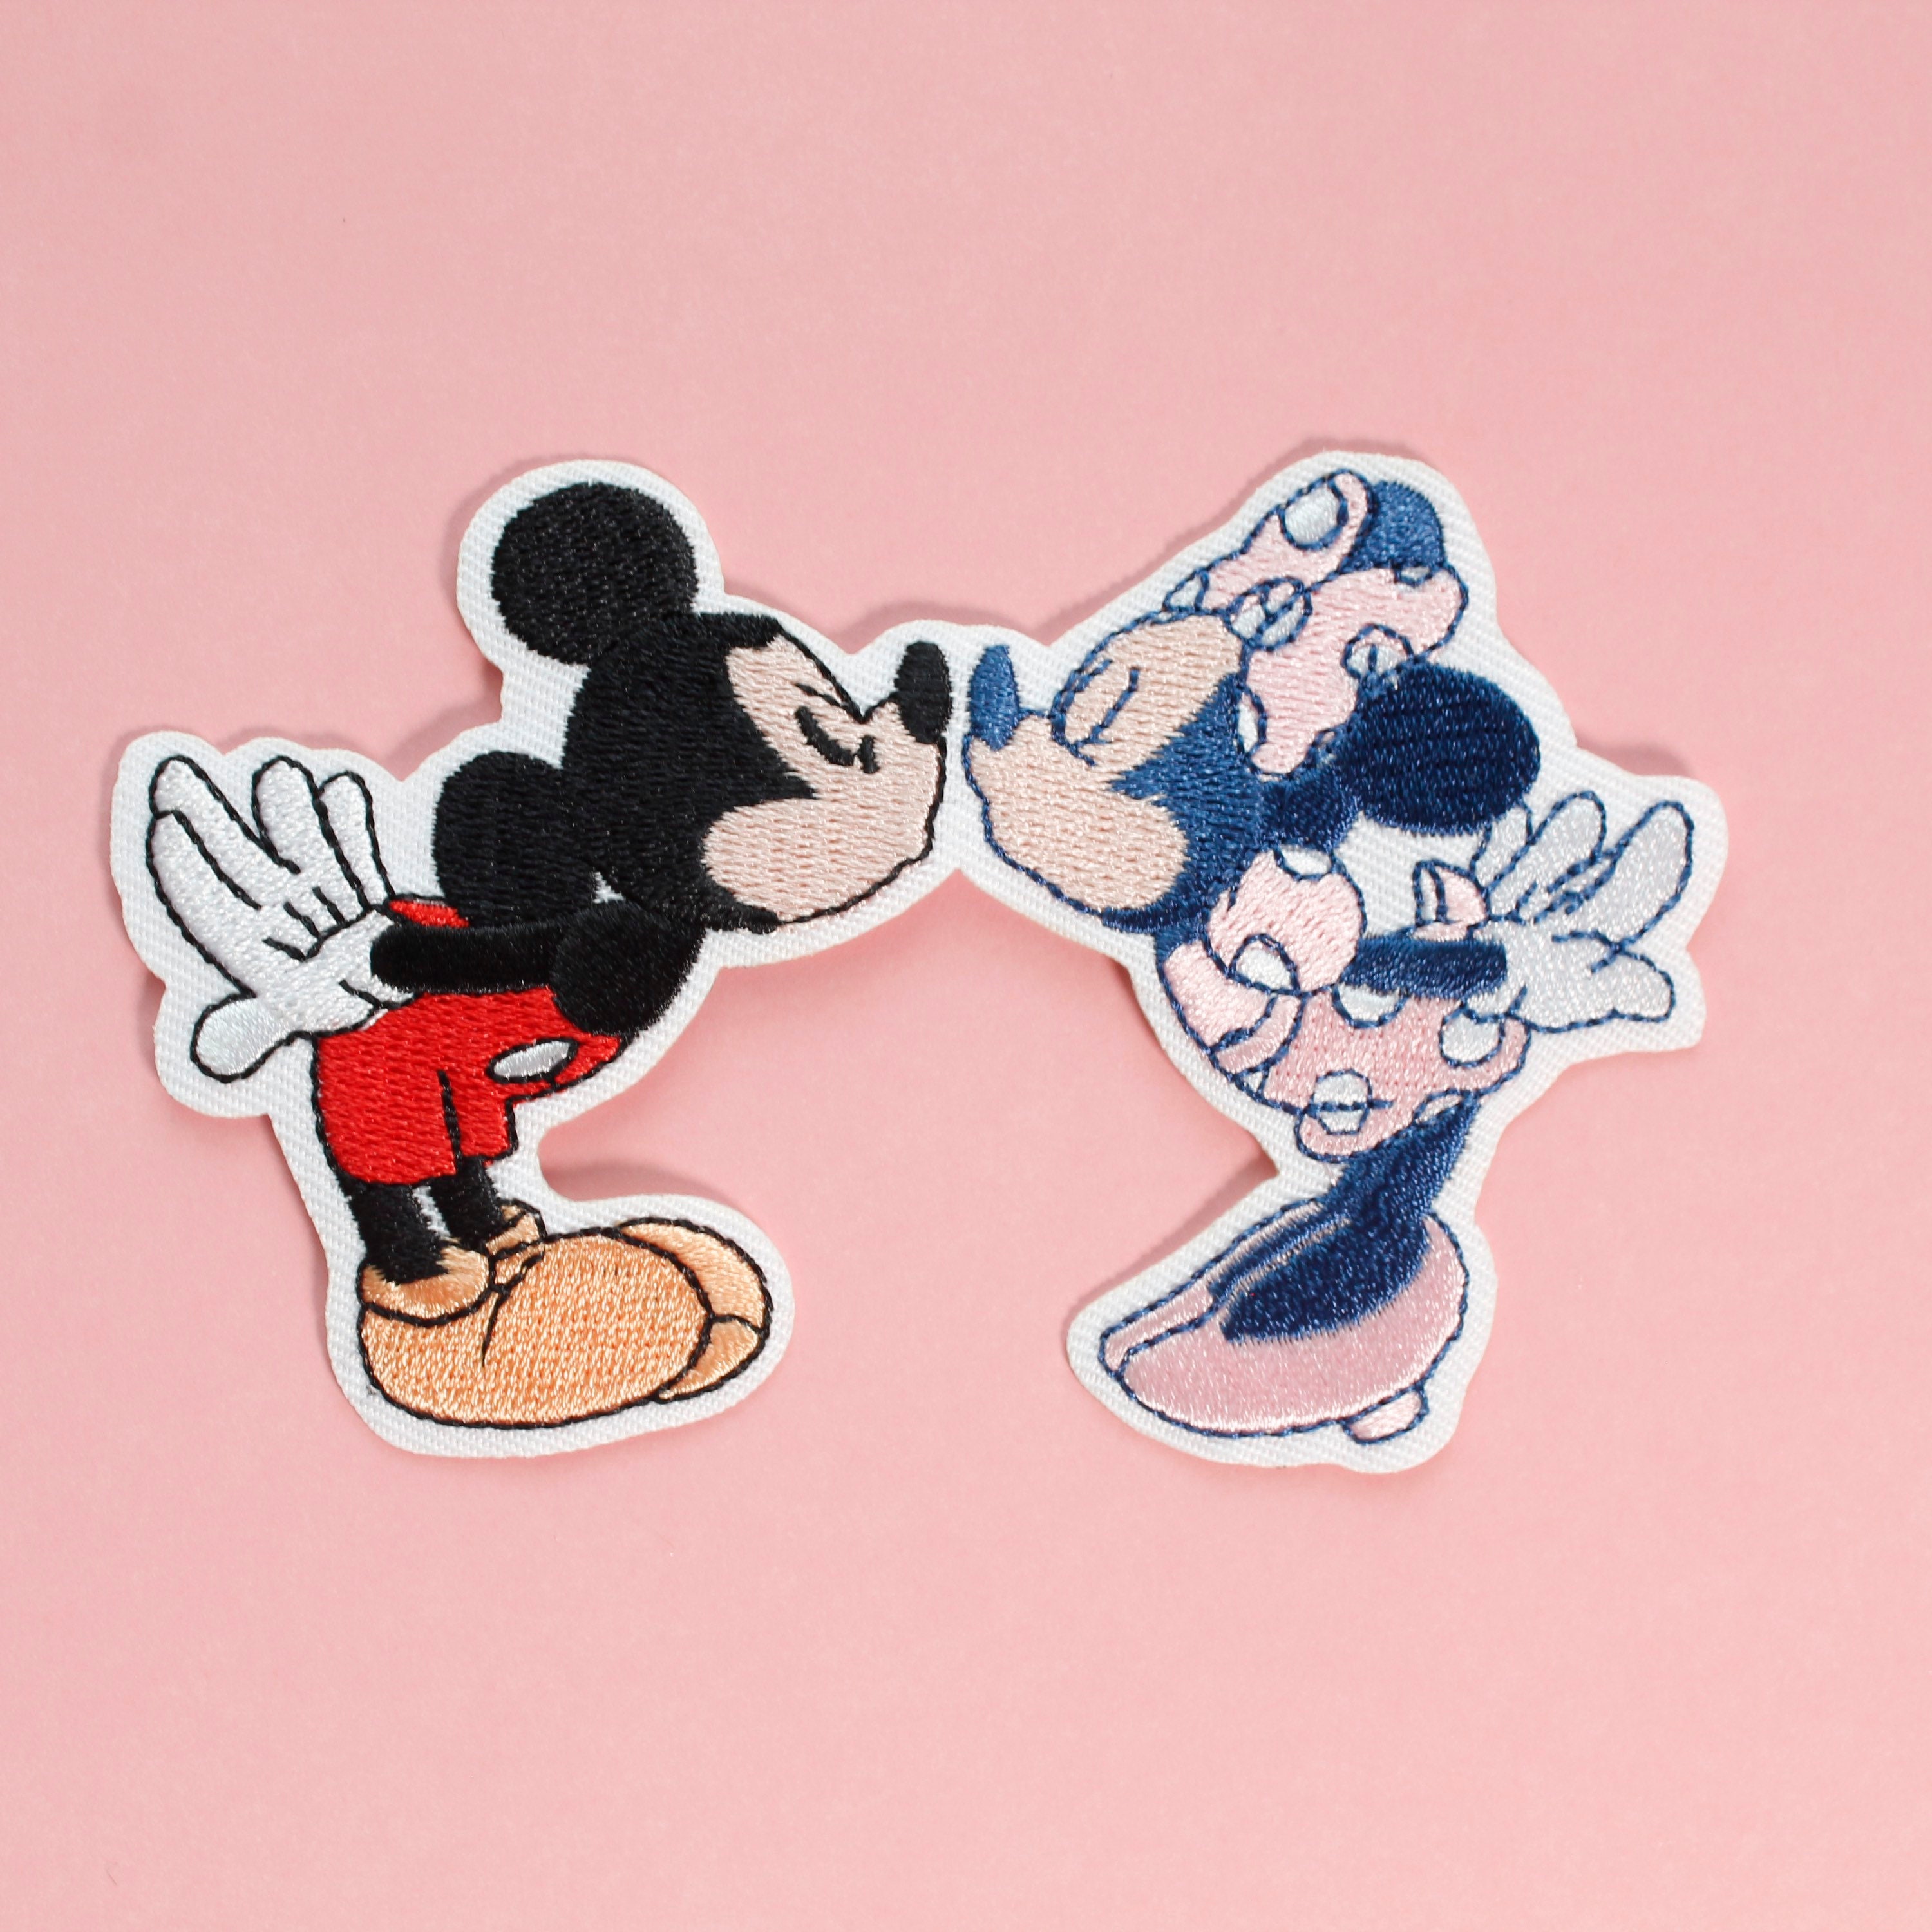 Mickey and Minnie Kissing Iron on Patch Mickey and Minnie 